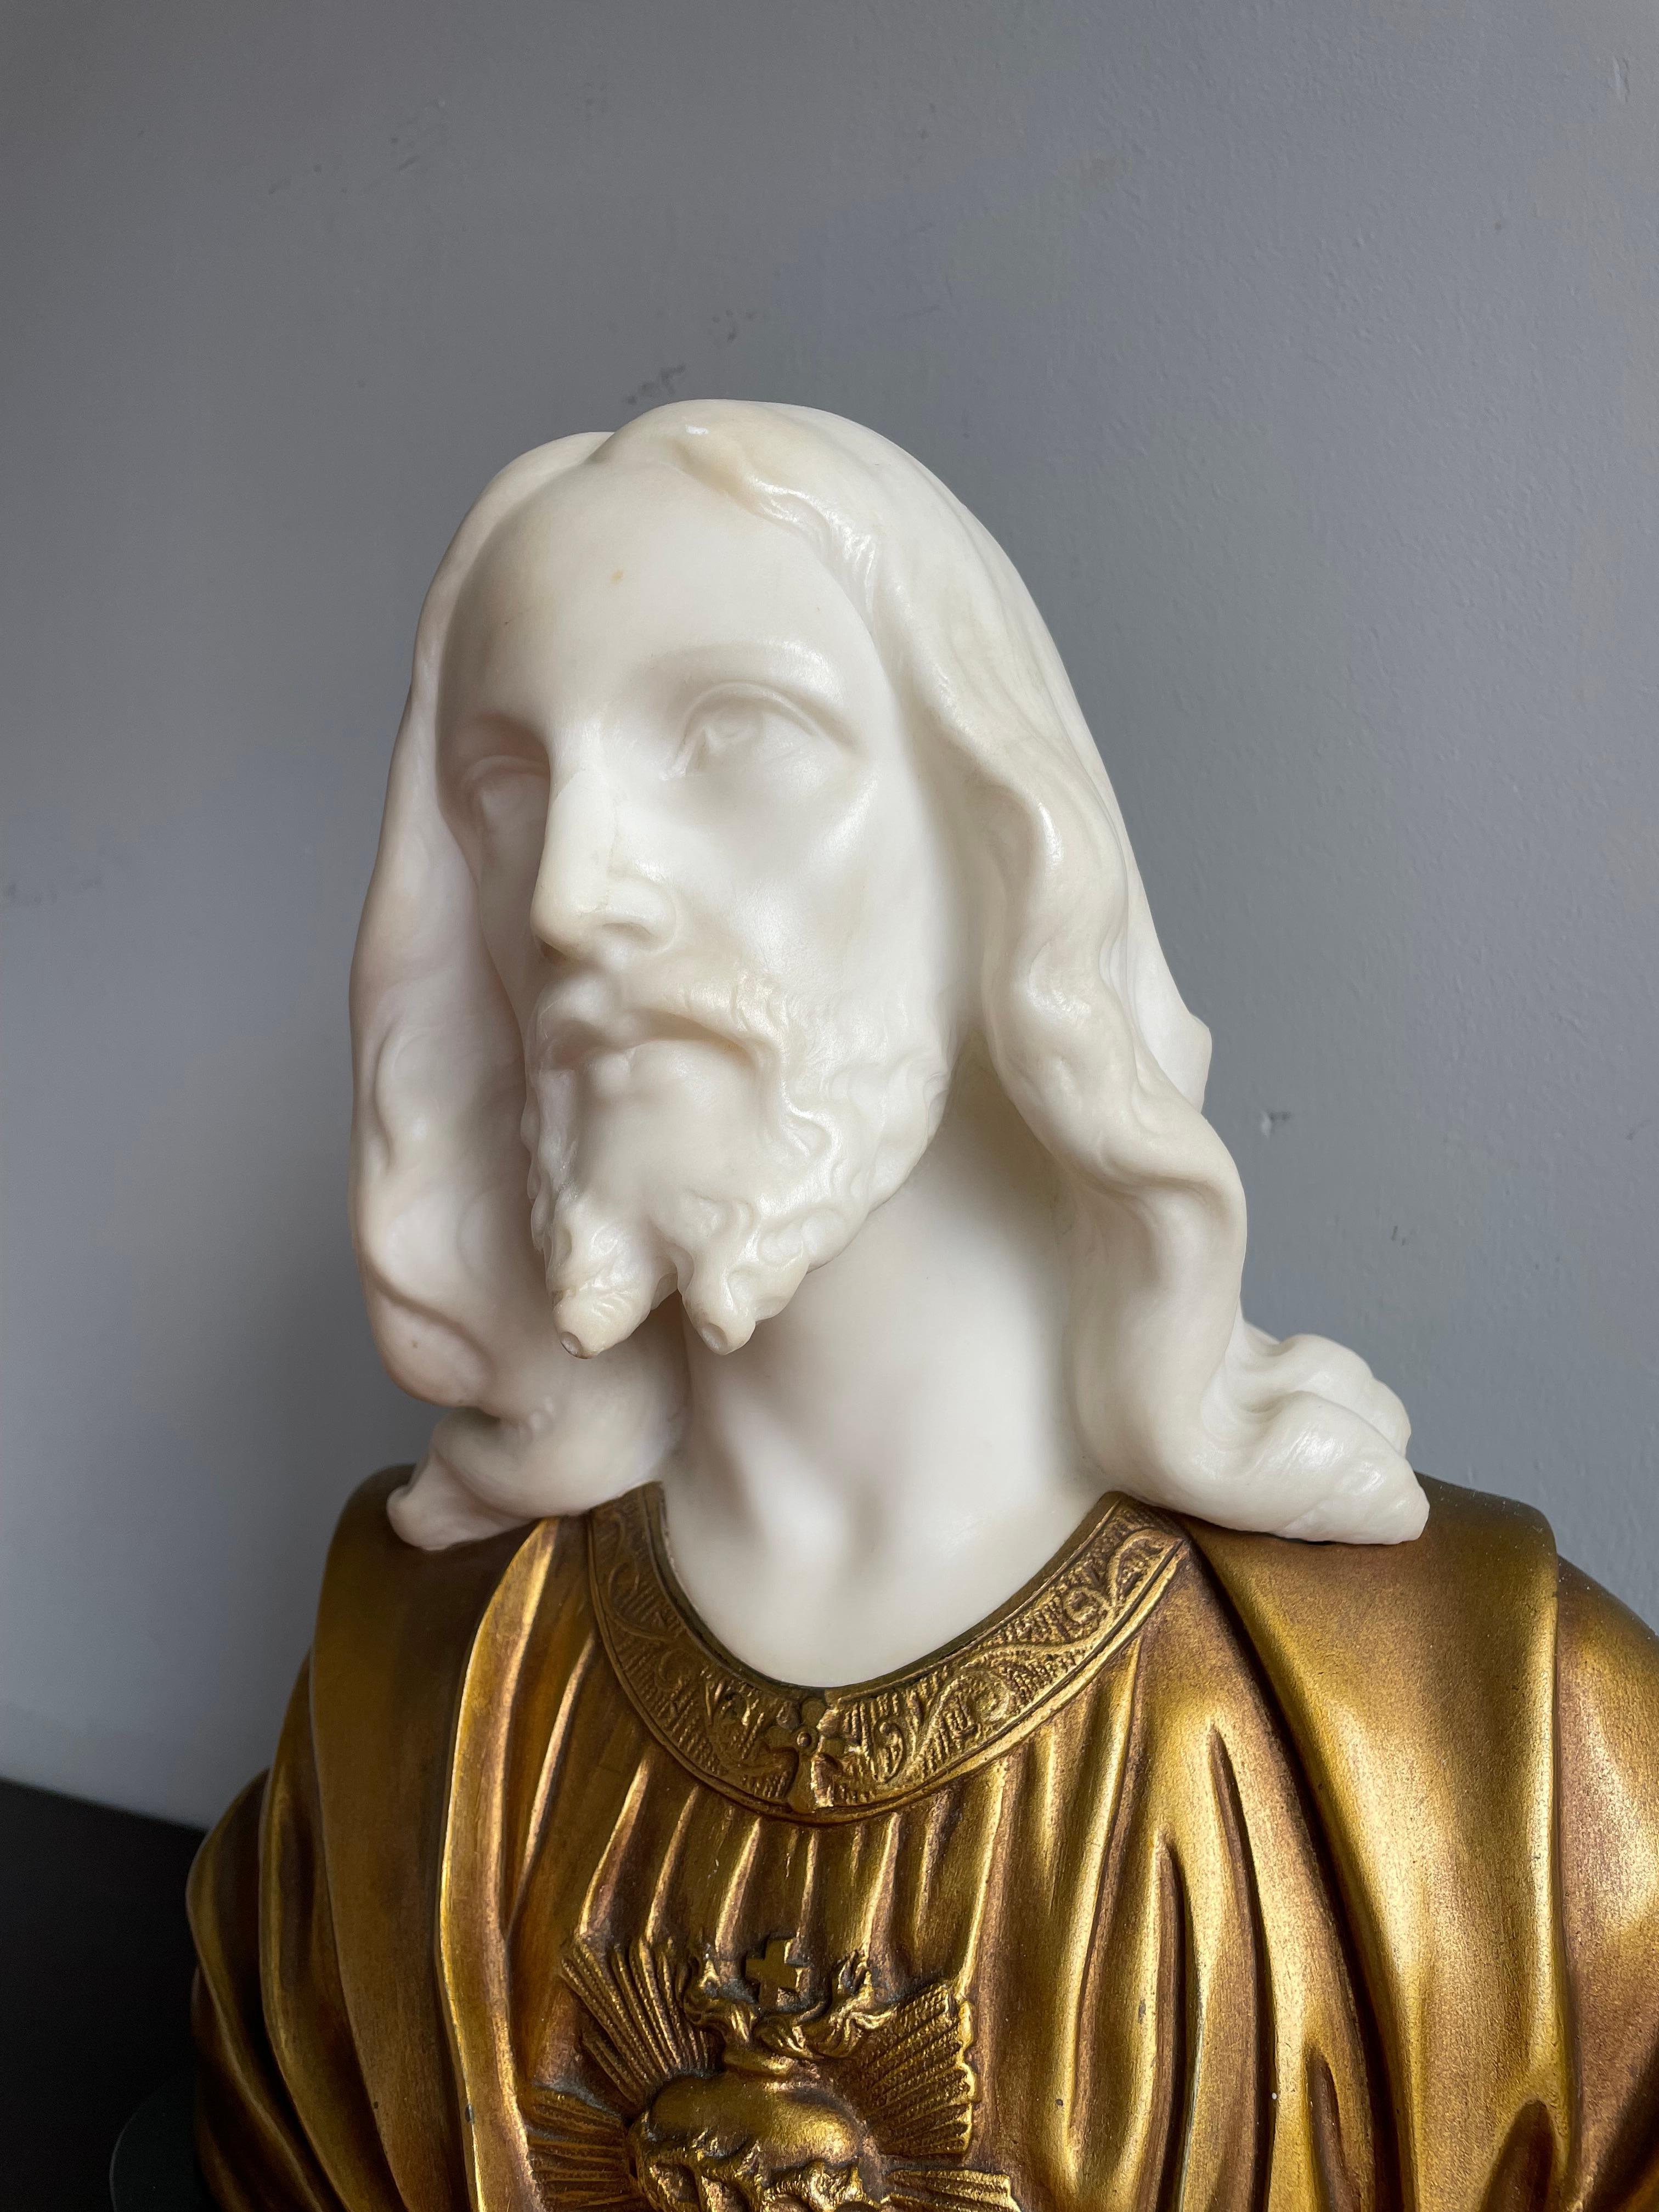 Hand-Crafted Antique Alabaster & Gilt Bronze Sculpture / Bust of Christ on a Marble Base 1920